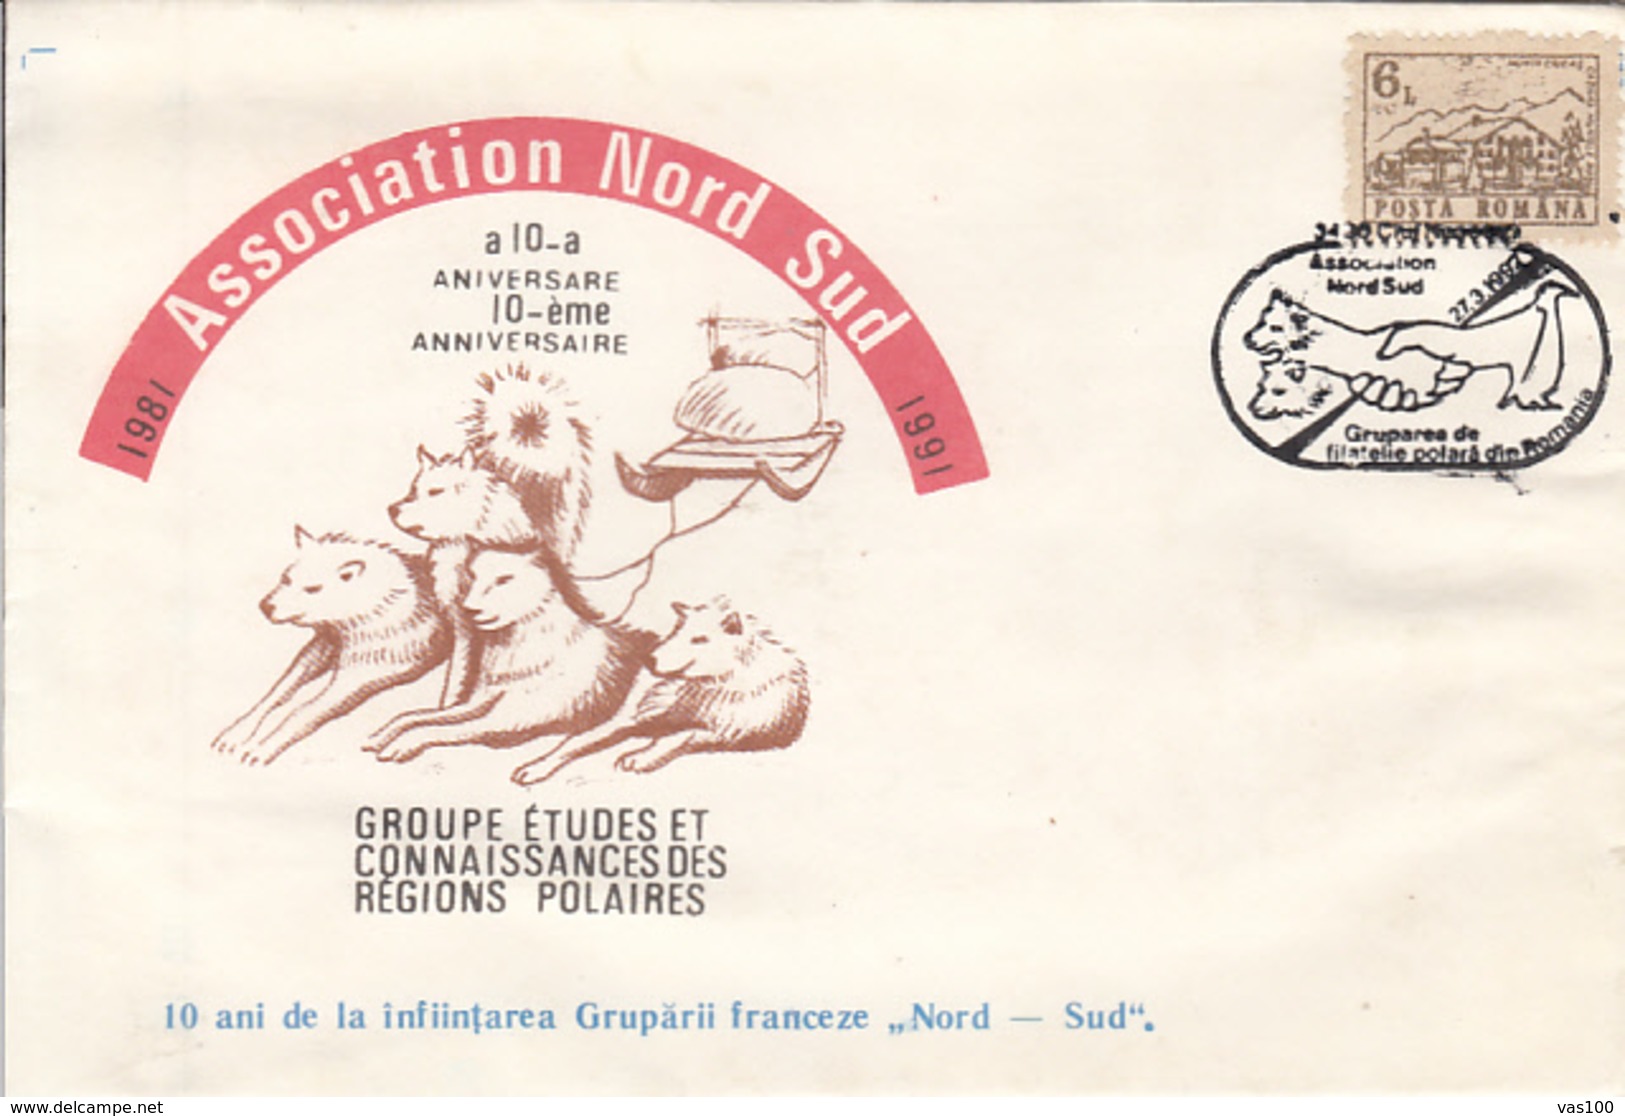 POLAR PHILATELY, NORTH-SOUTH ASSOCIATION ANNIVERSARY, SLED, DOGS, SPECIAL COVER,1991, ROMANIA - Events & Commemorations